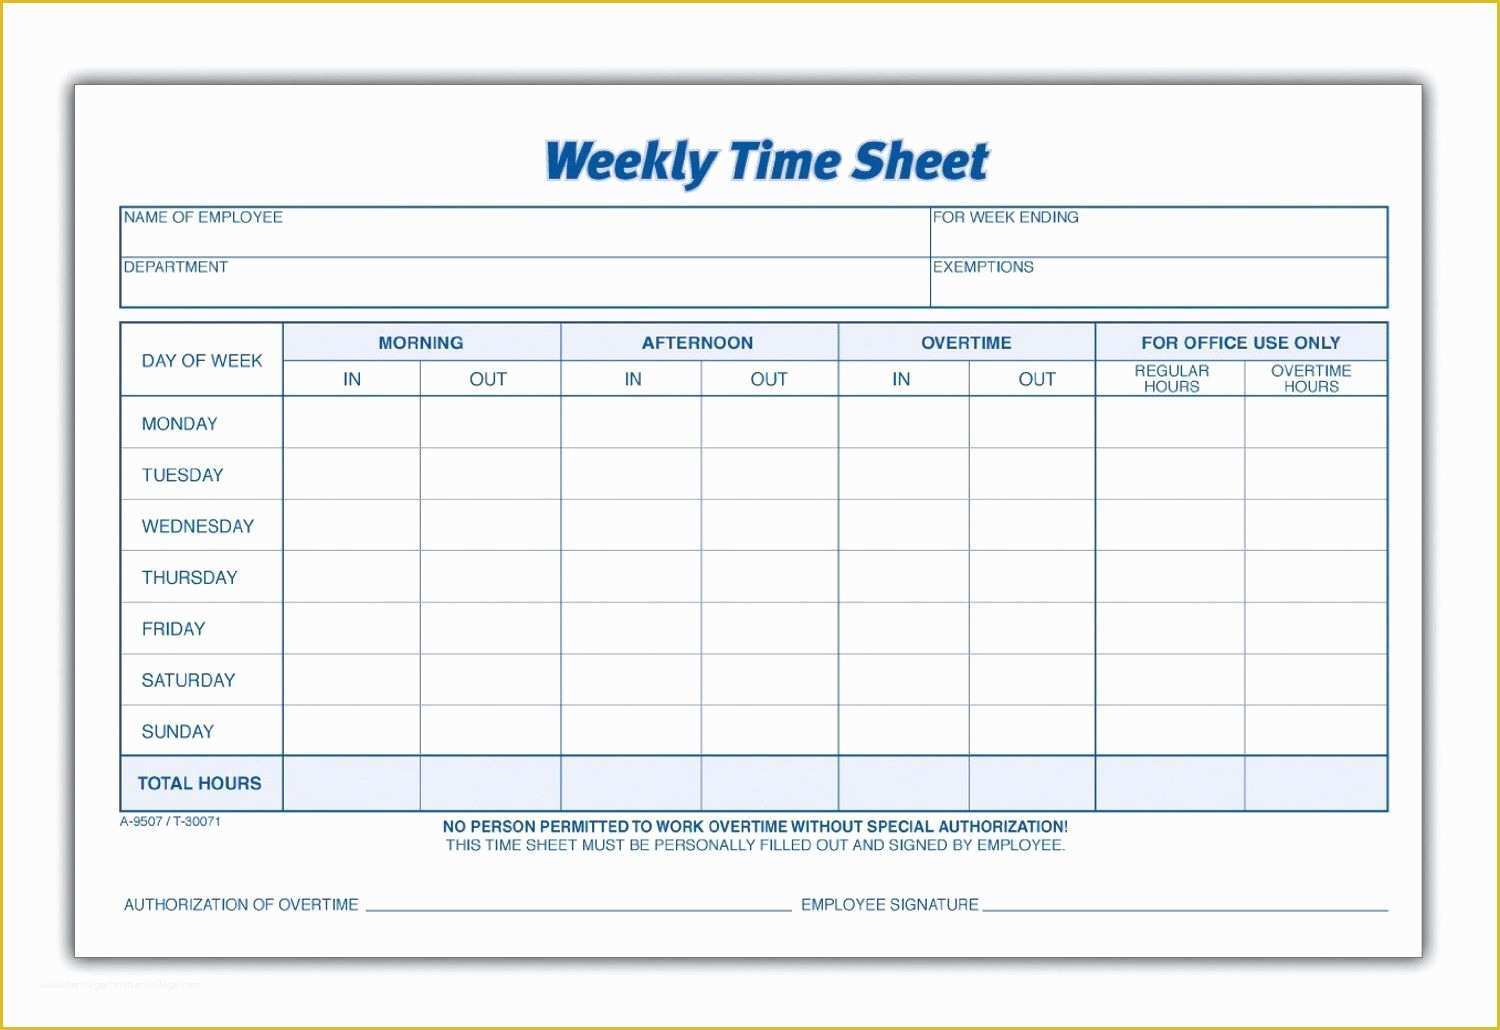 Free Weekly Timesheet Template Of Weekly Employee Time Sheet Good to Know